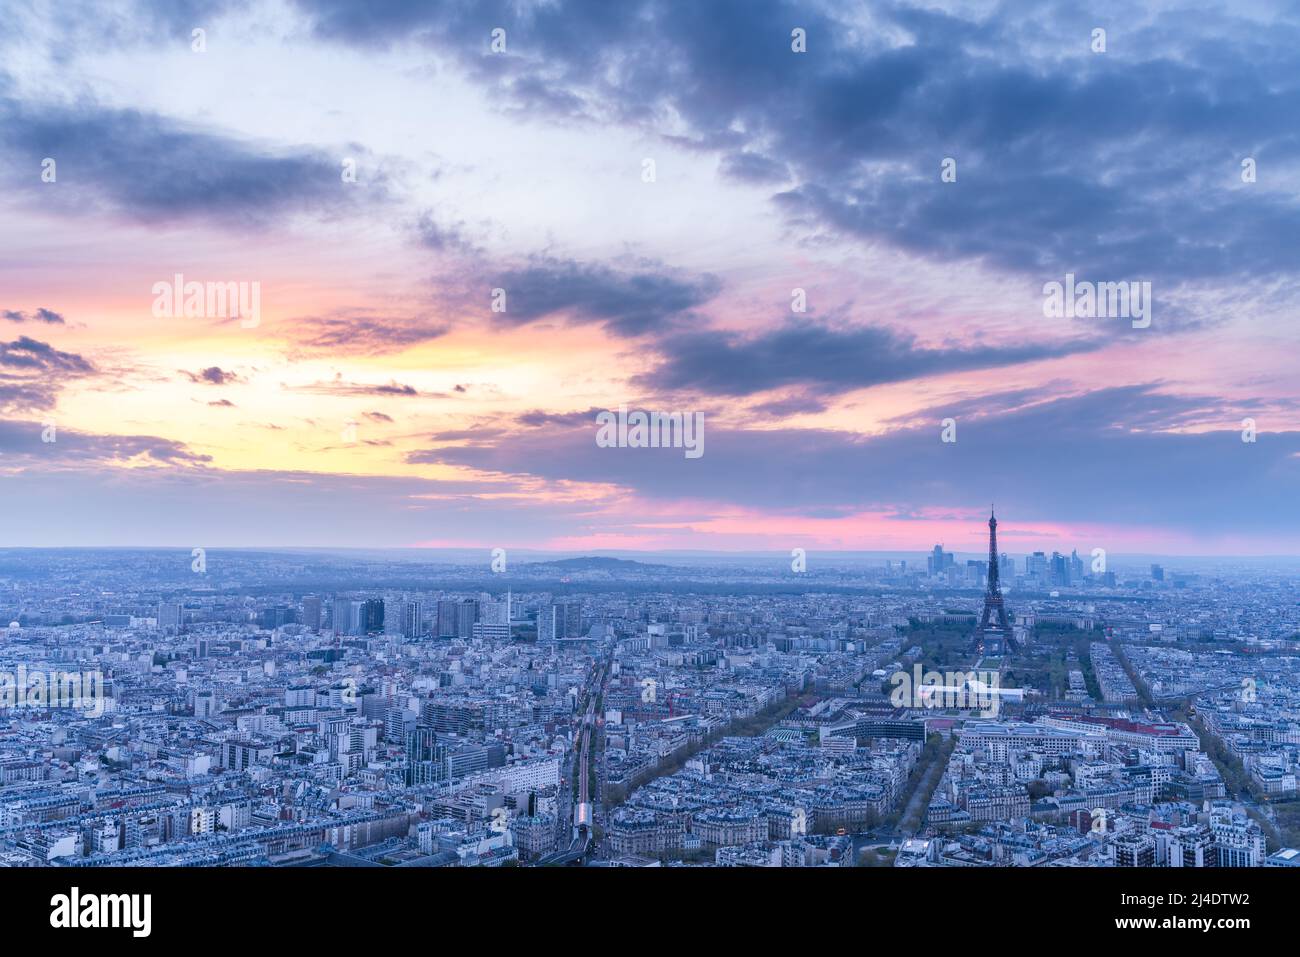 Paris view from above at sunset. France, Europe Stock Photo